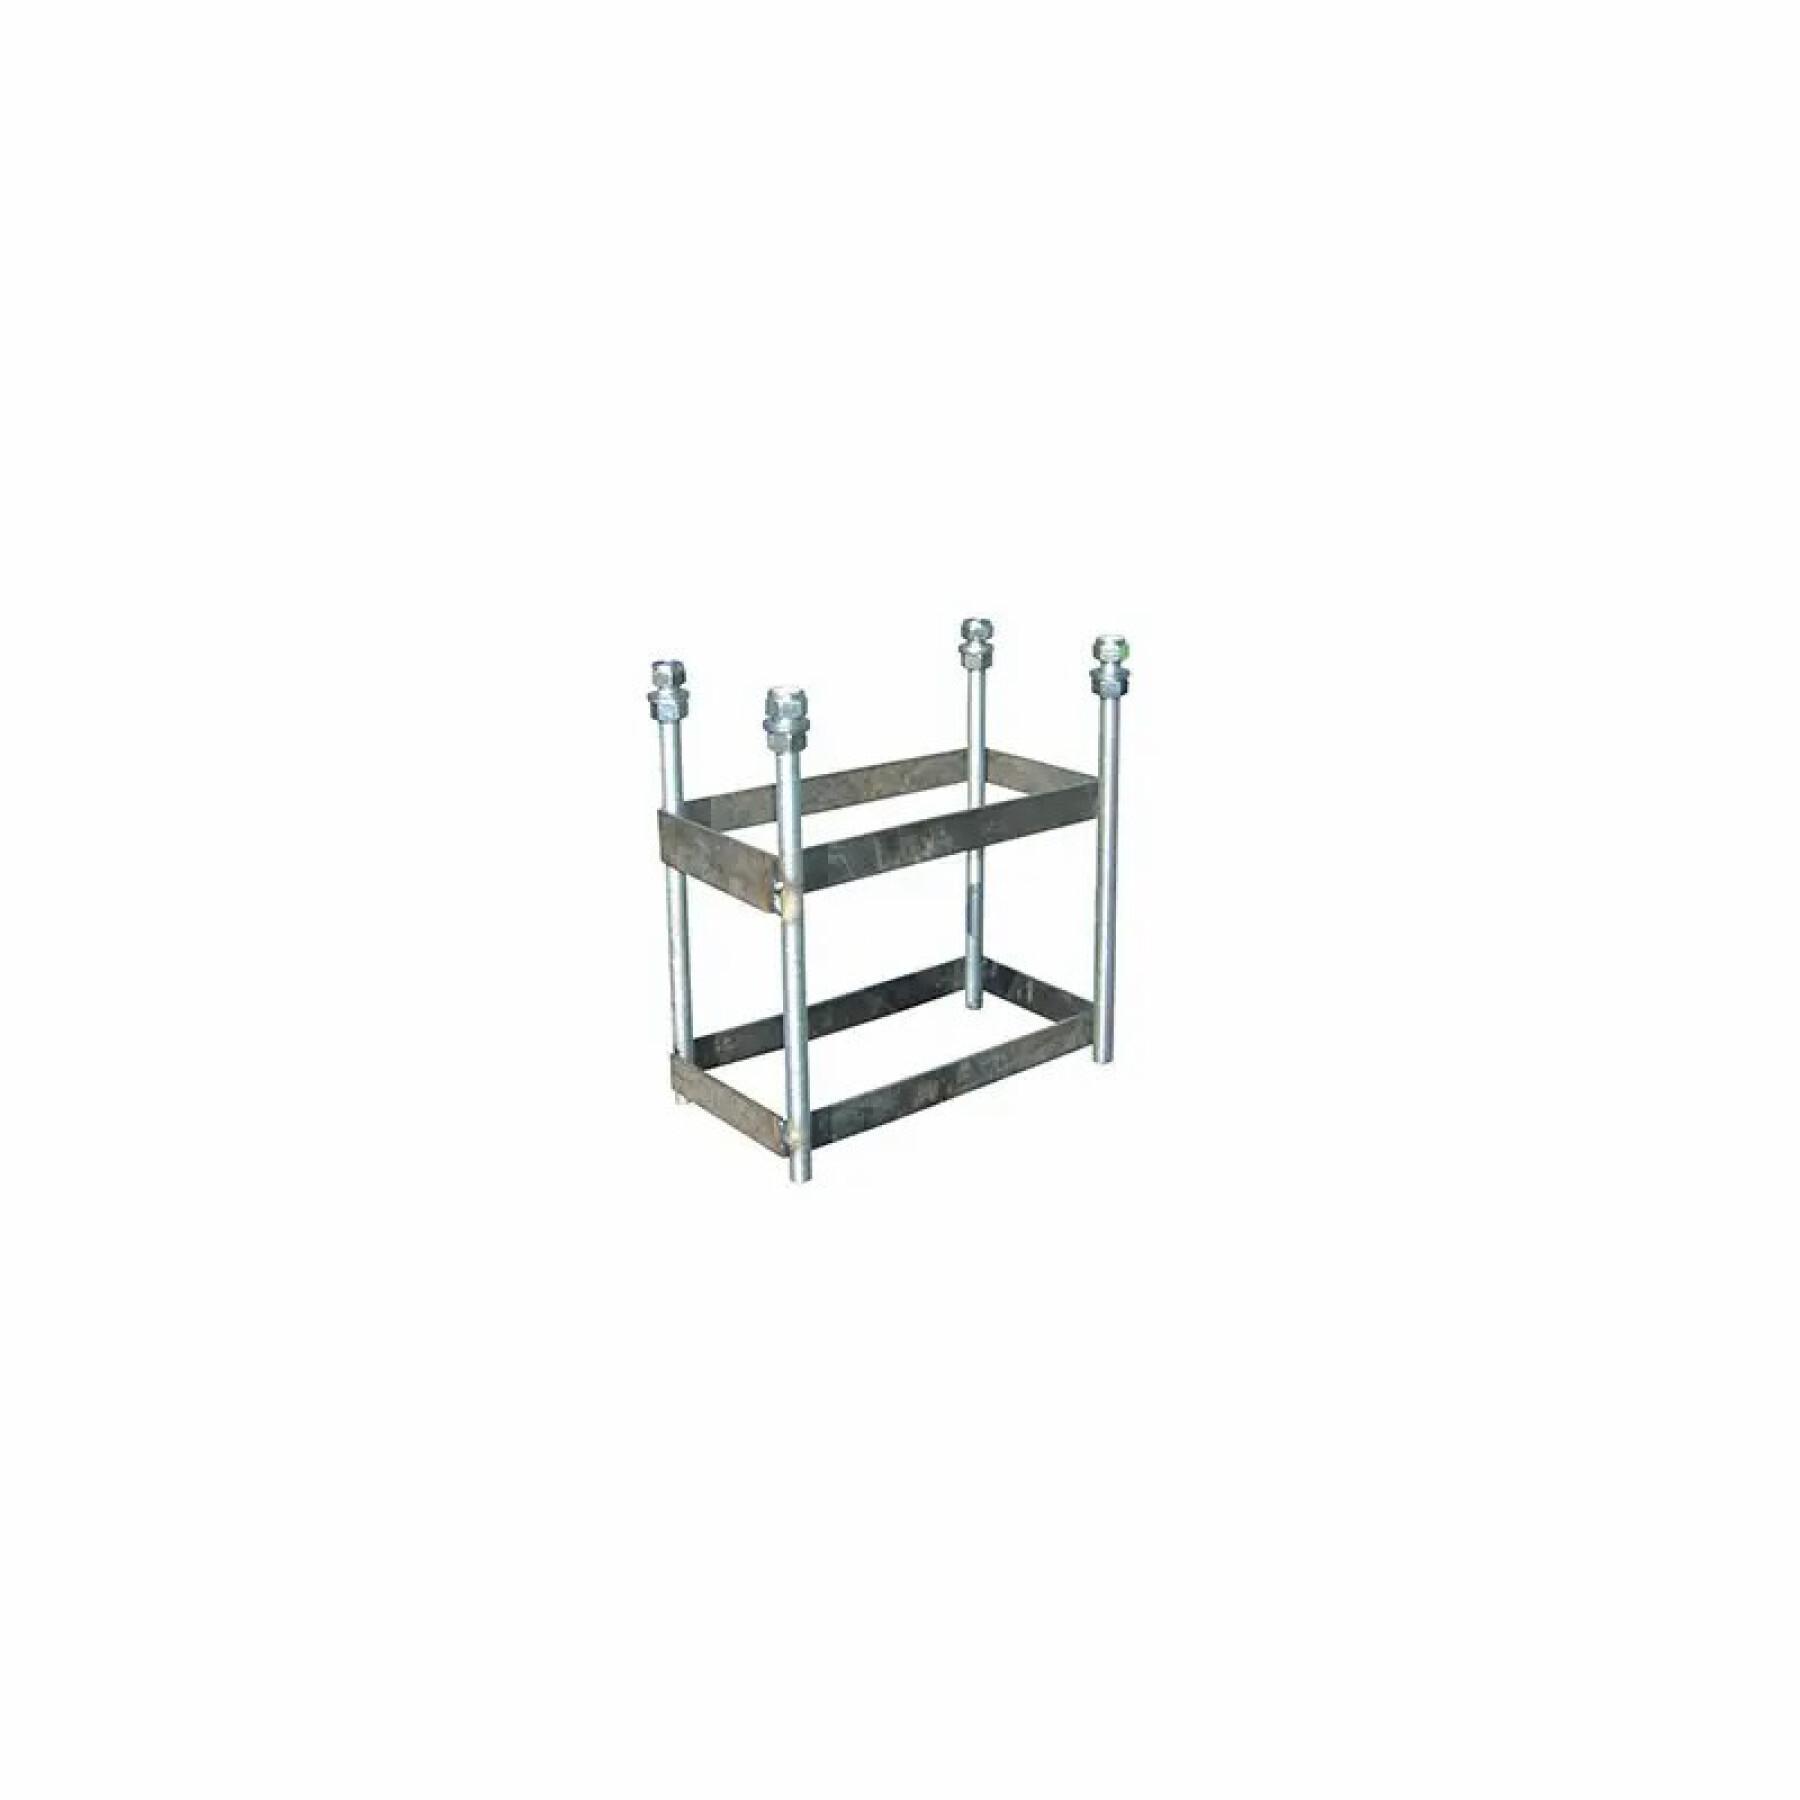 Set of 2 single-pipe minibasket baskets with base for anchoring - without board or hoop Softee Equipment Deluxe